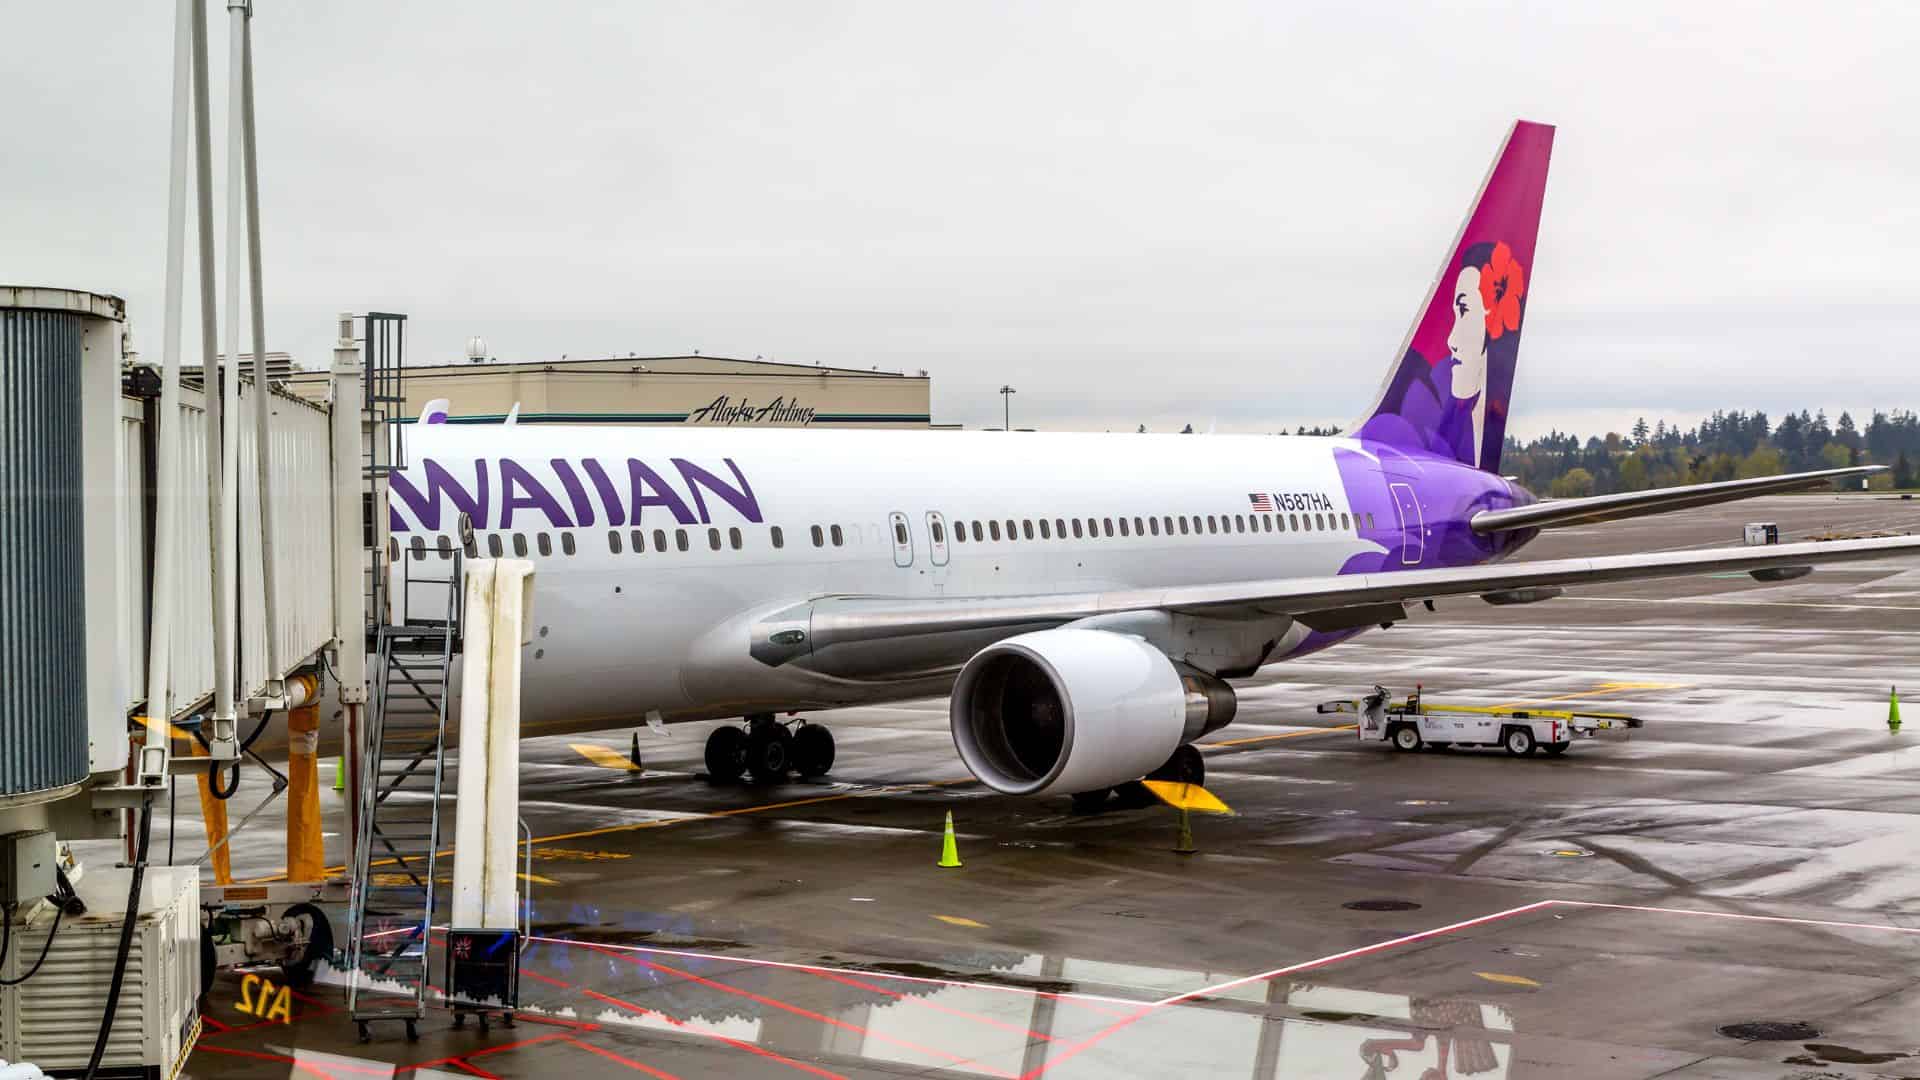 Photo of a large passenger airplane from Hawaiian Airlines